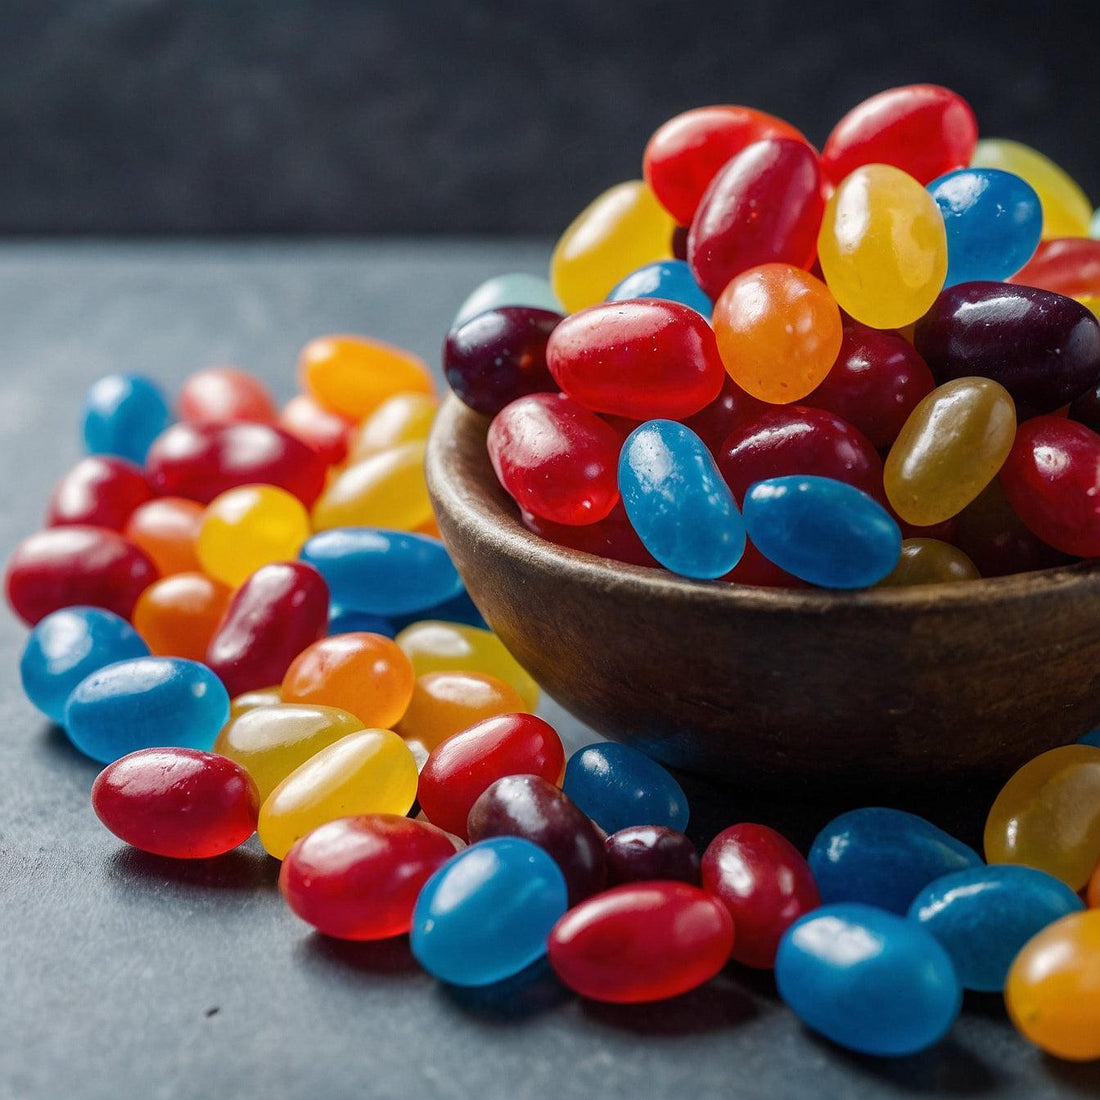 Do Jelly Belly Jelly Beans Expire Or Go Bad? - BargainBoxed.com